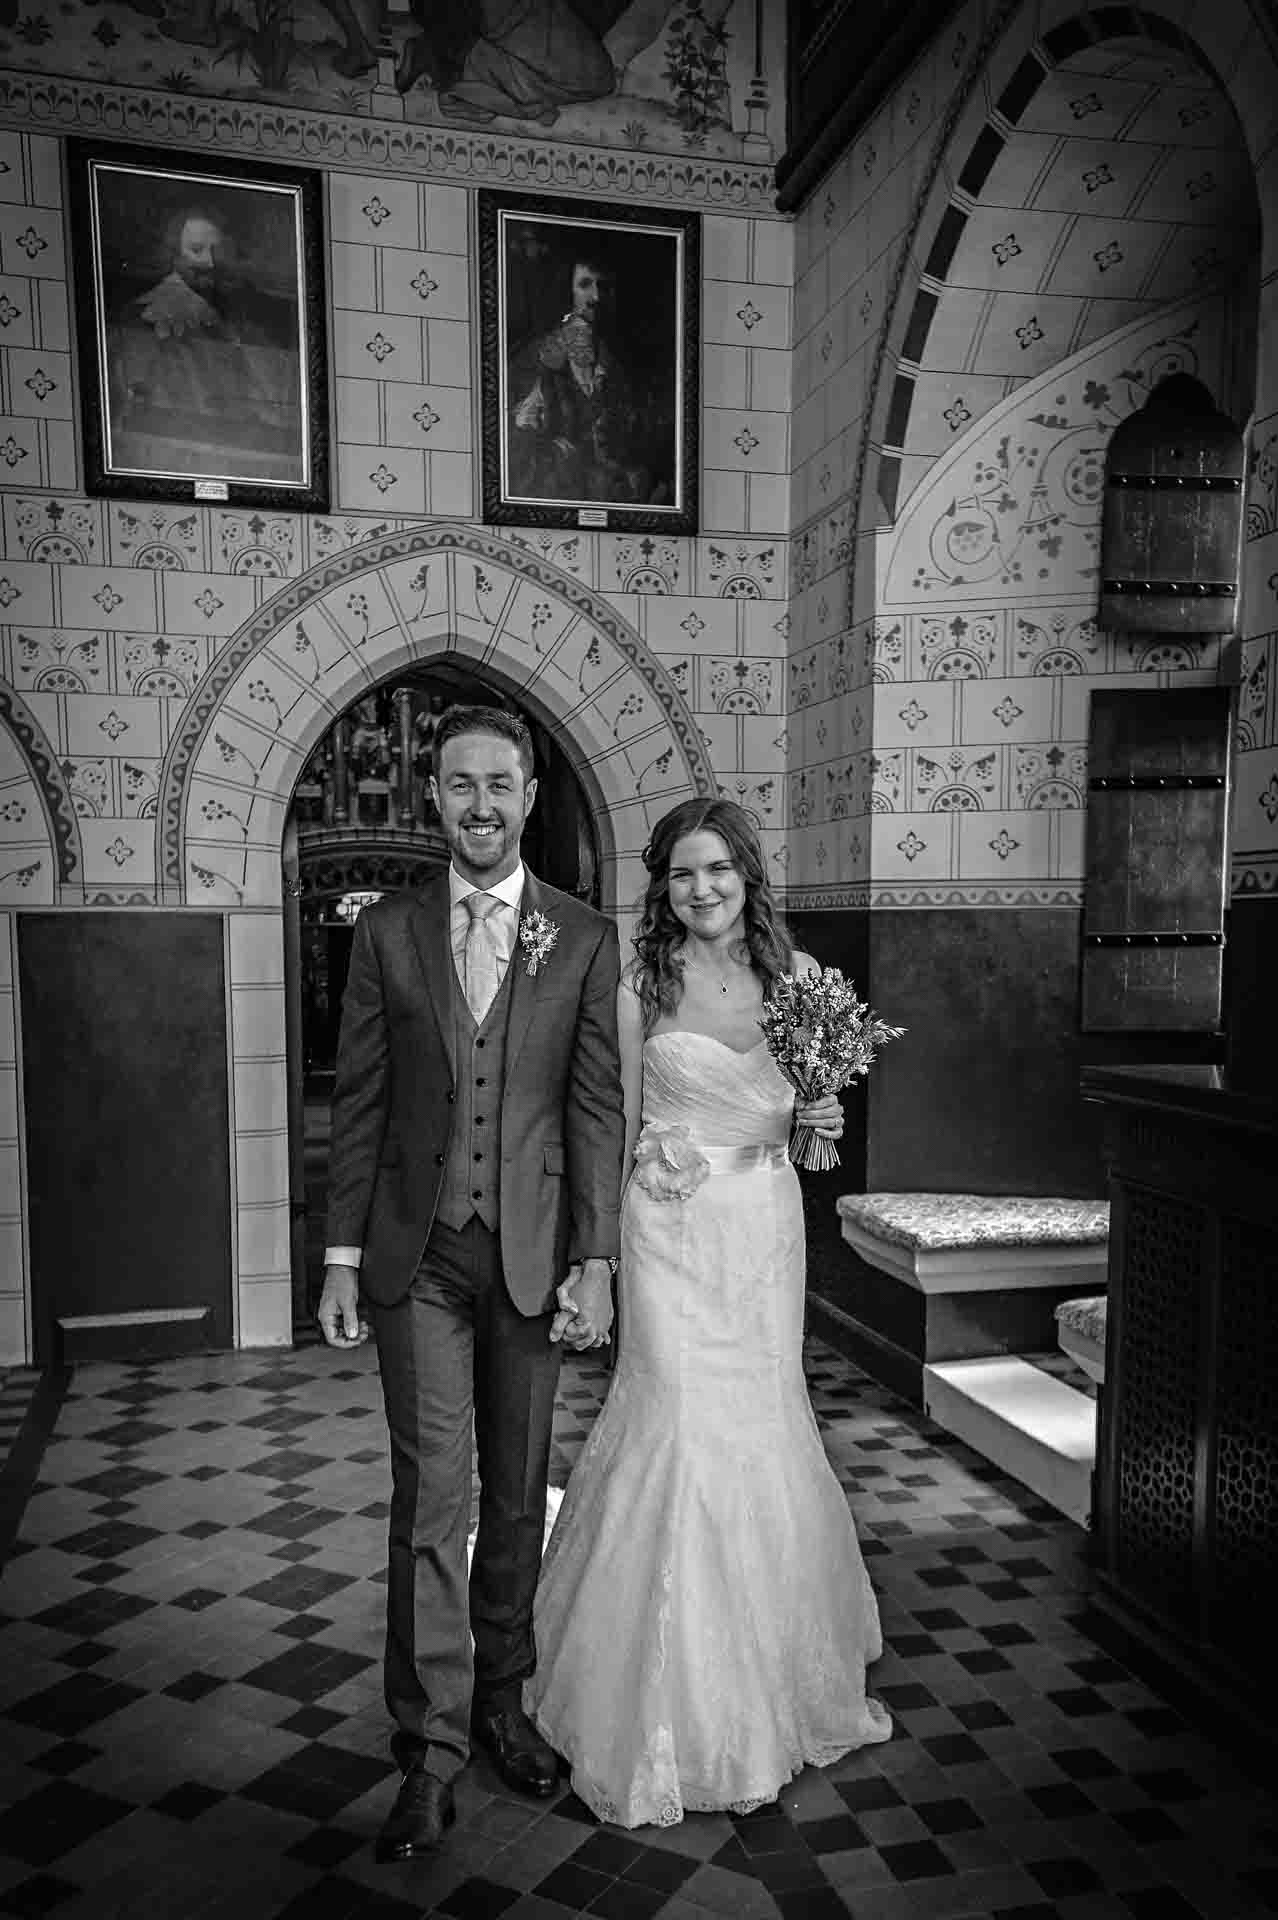 The bride and groom pass through the Banqueting Hall after their wedding ceremony